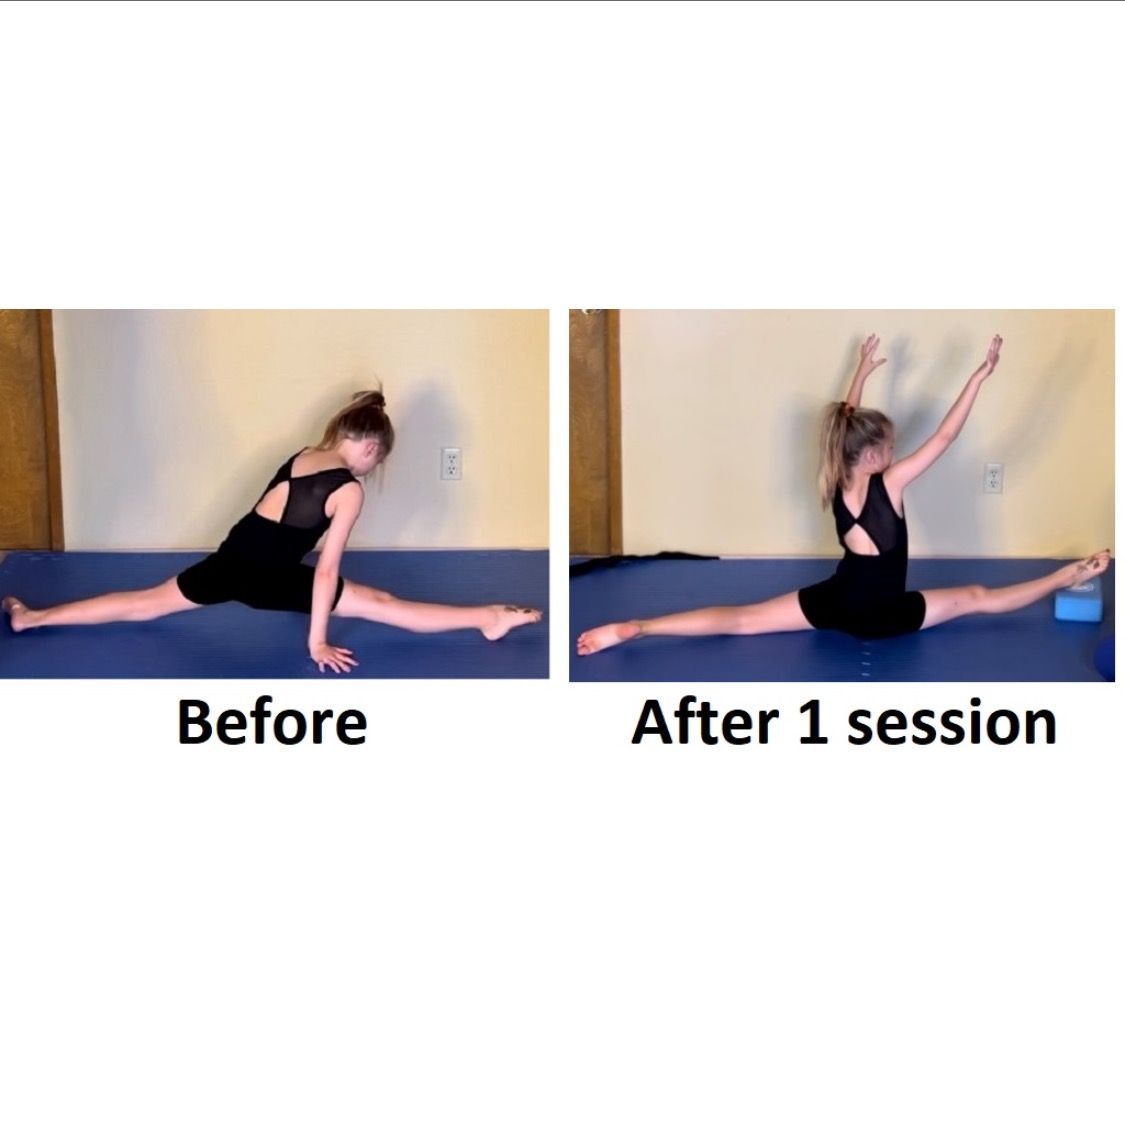 Showing increased flexibility now able to go past full splits into over-splits 